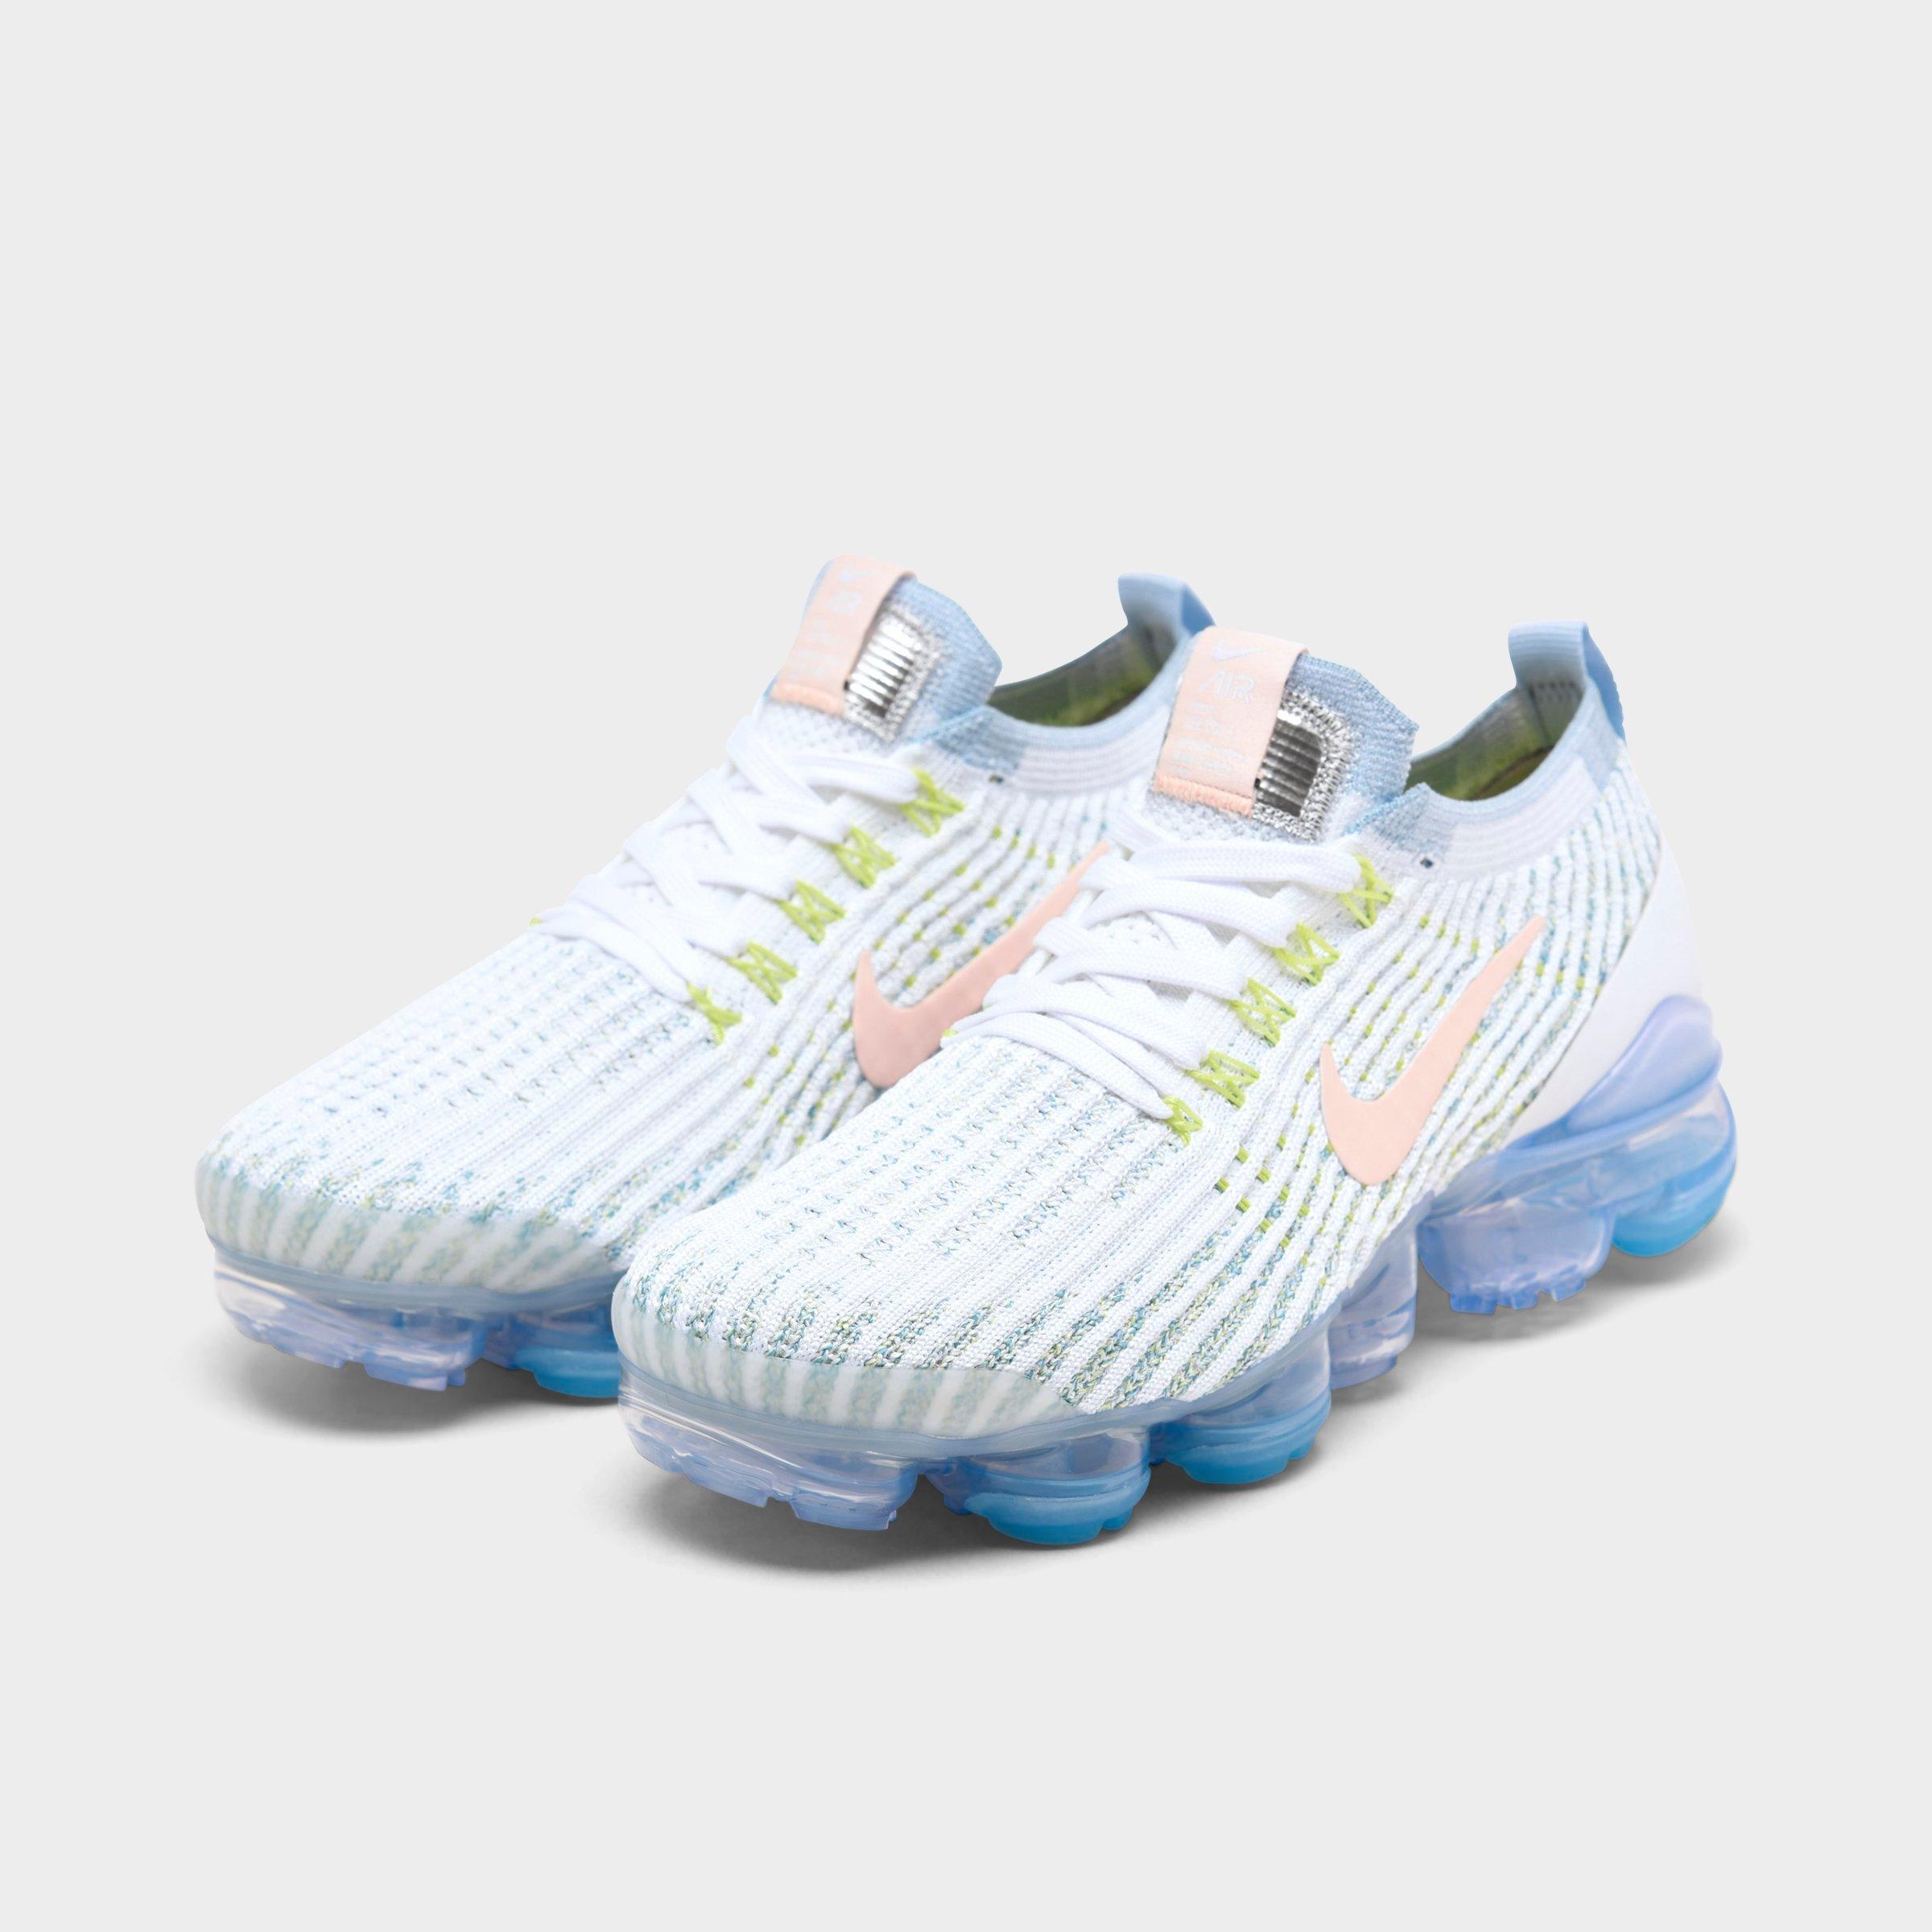 can vapormax be washed